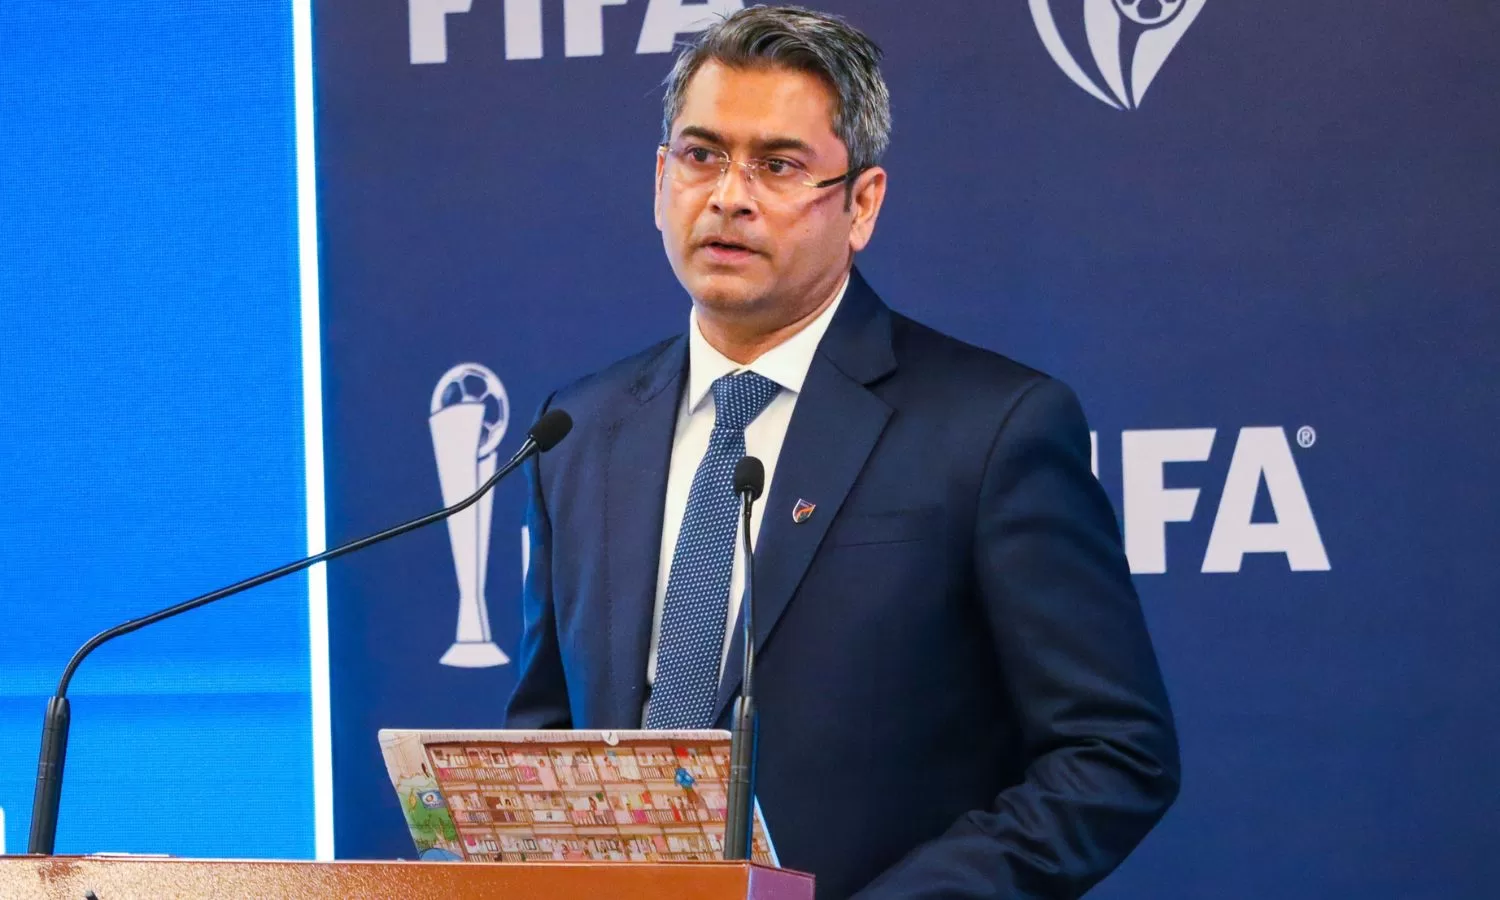 AIFF set to implement budget cuts for I-League and grassroots